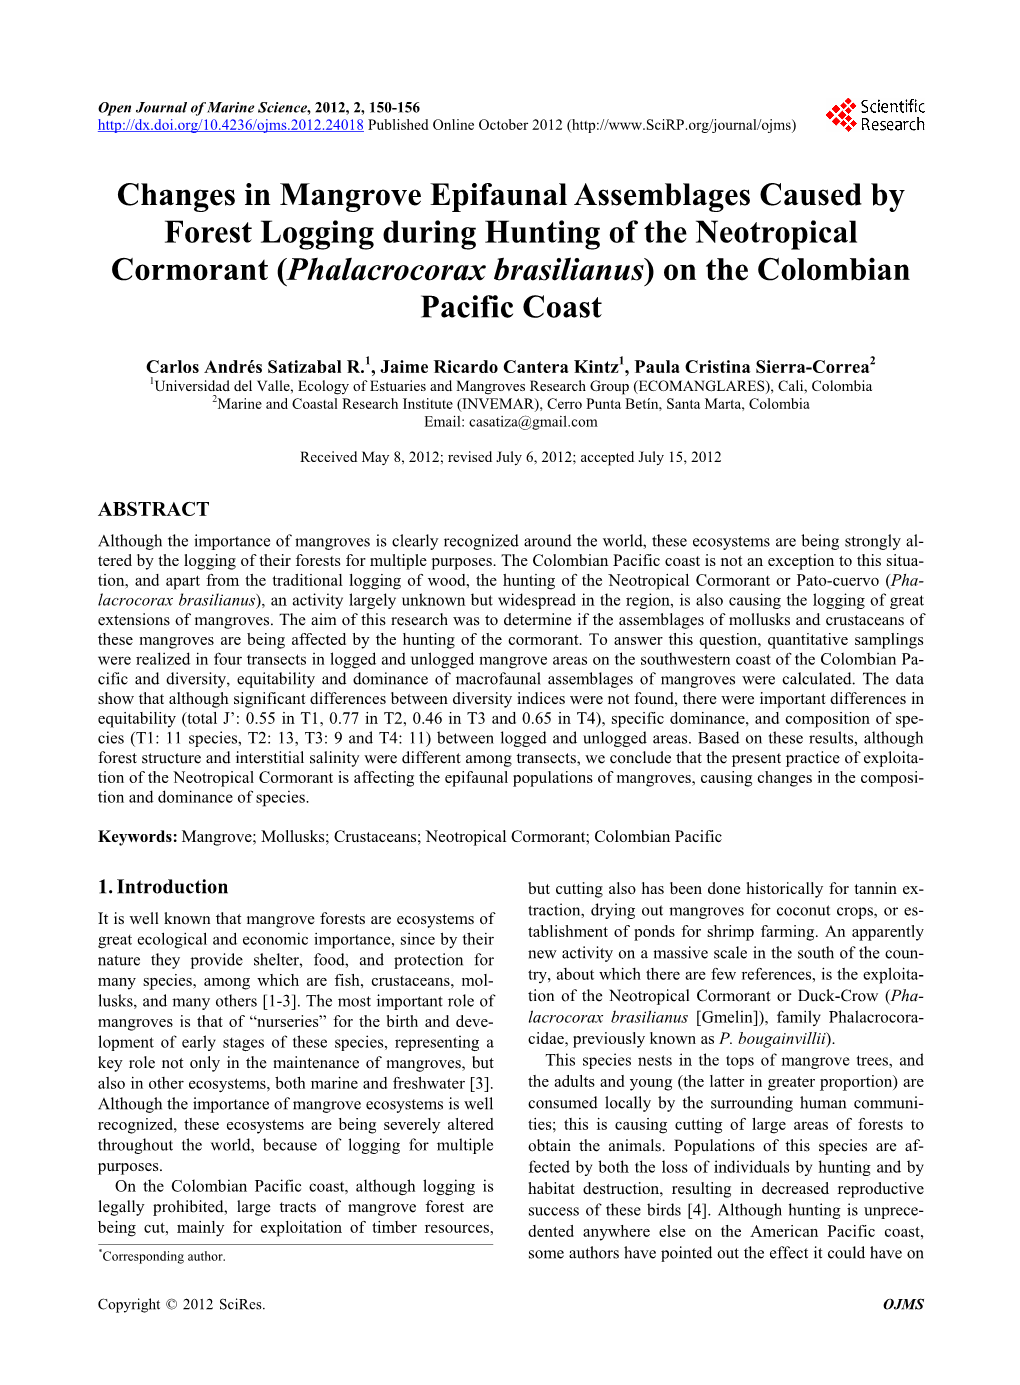 Changes in Mangrove Epifaunal Assemblages Caused by Forest